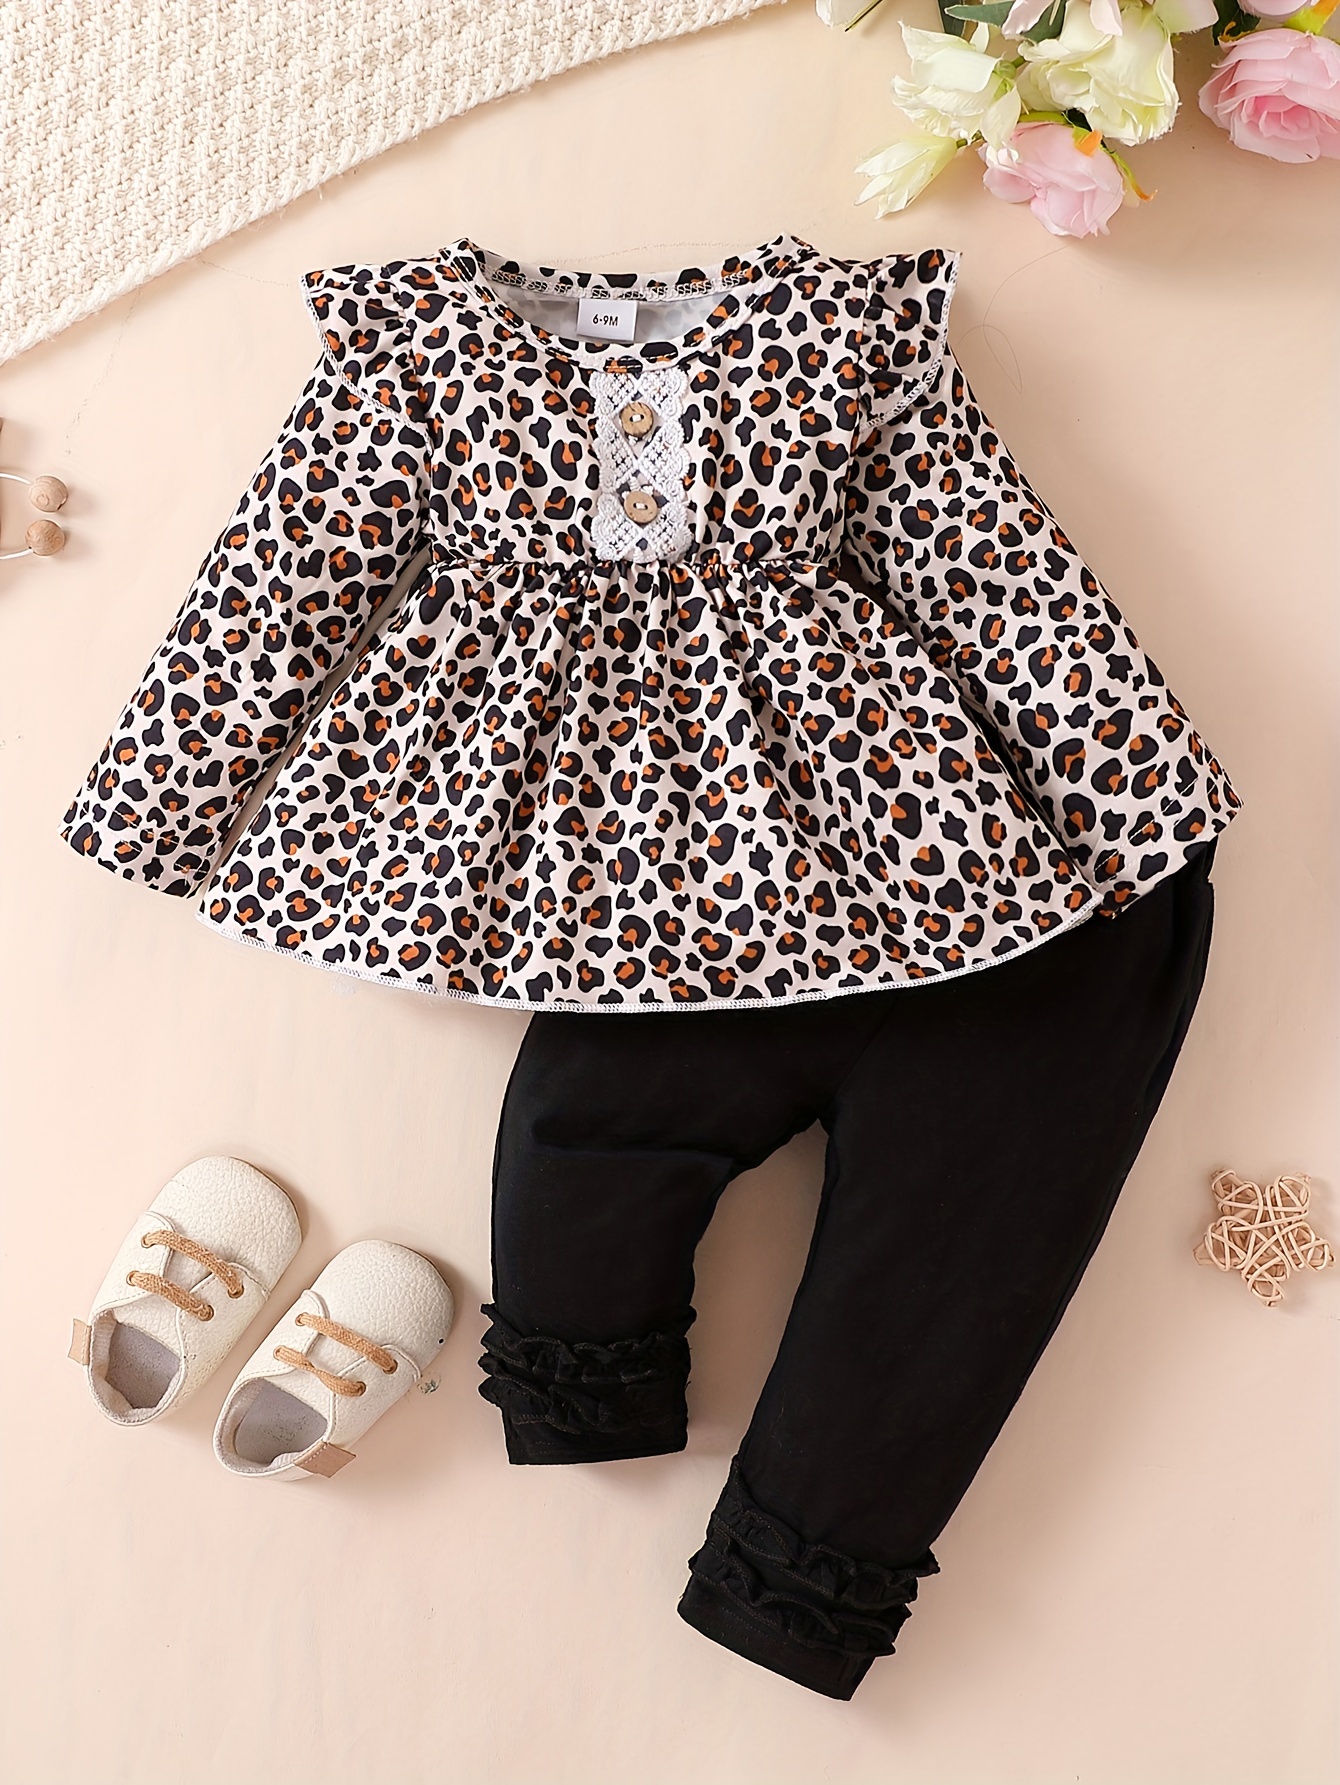 Cute Baby Clothes - Cute Clothes For Babies